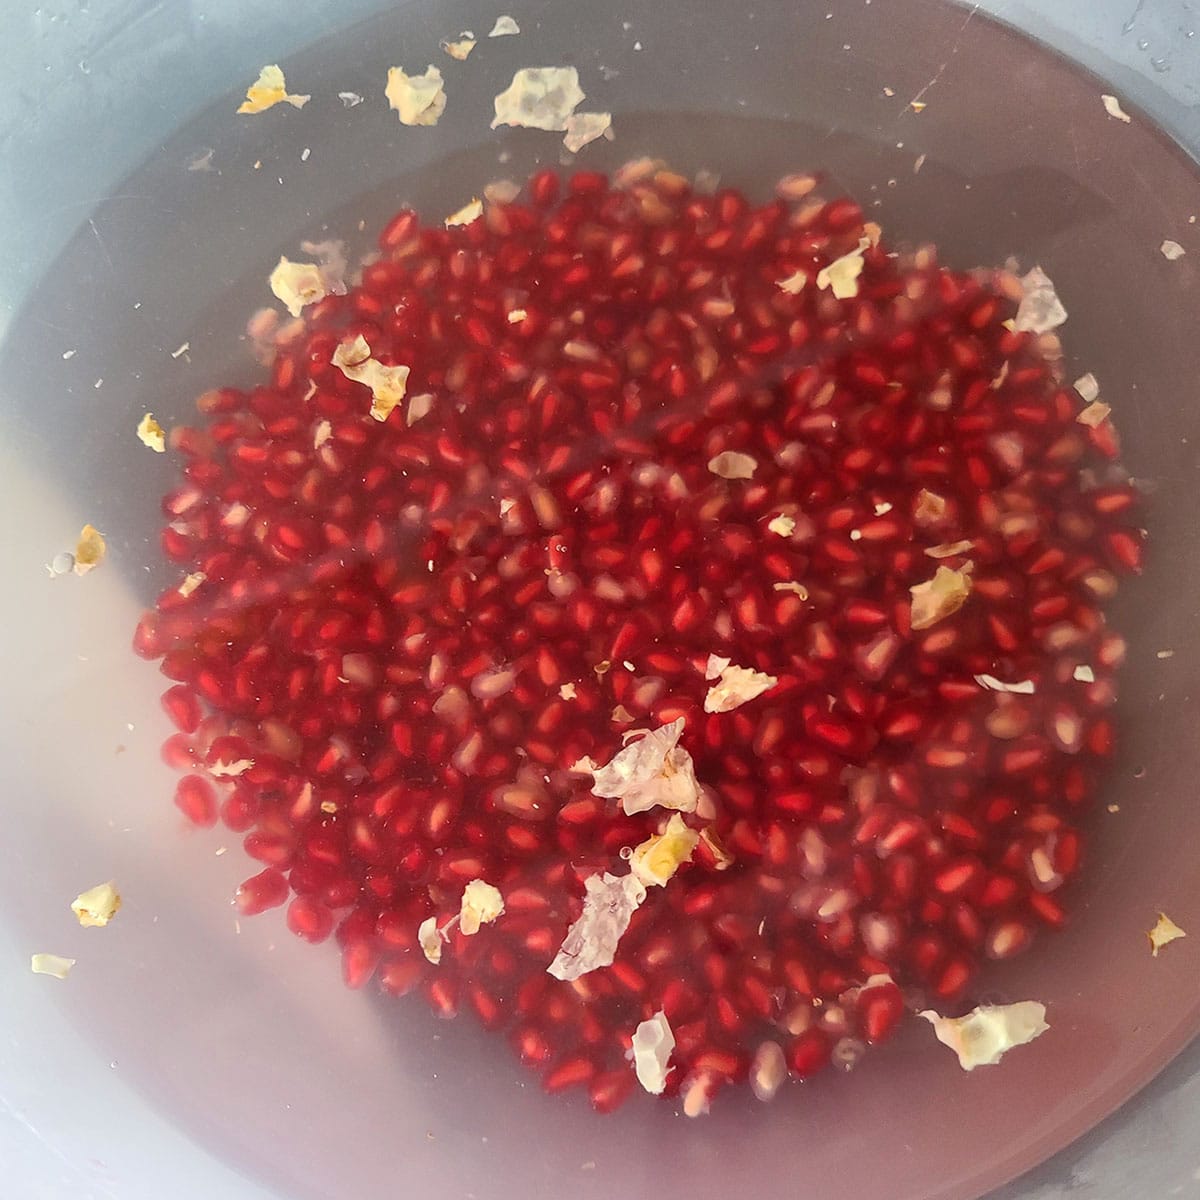 Pomegranate arils in water, with pieces of membrane floating.